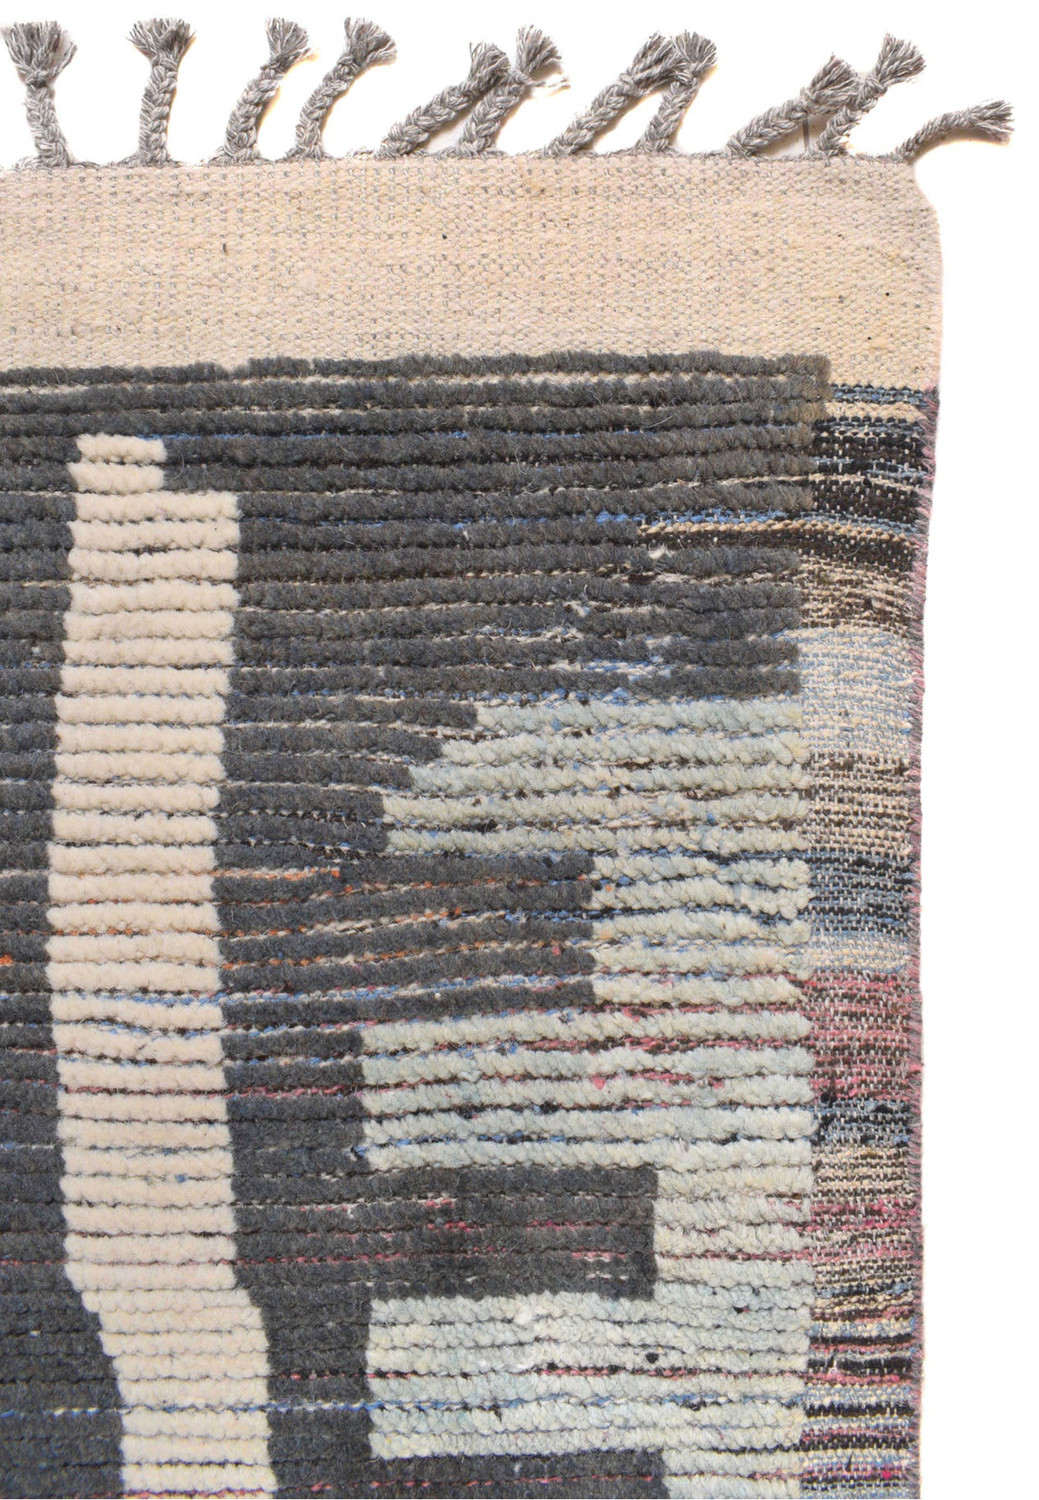 Close-up on the fringe of the Moroccan Rug, highlighting the detail in the weave and the transition of colors.